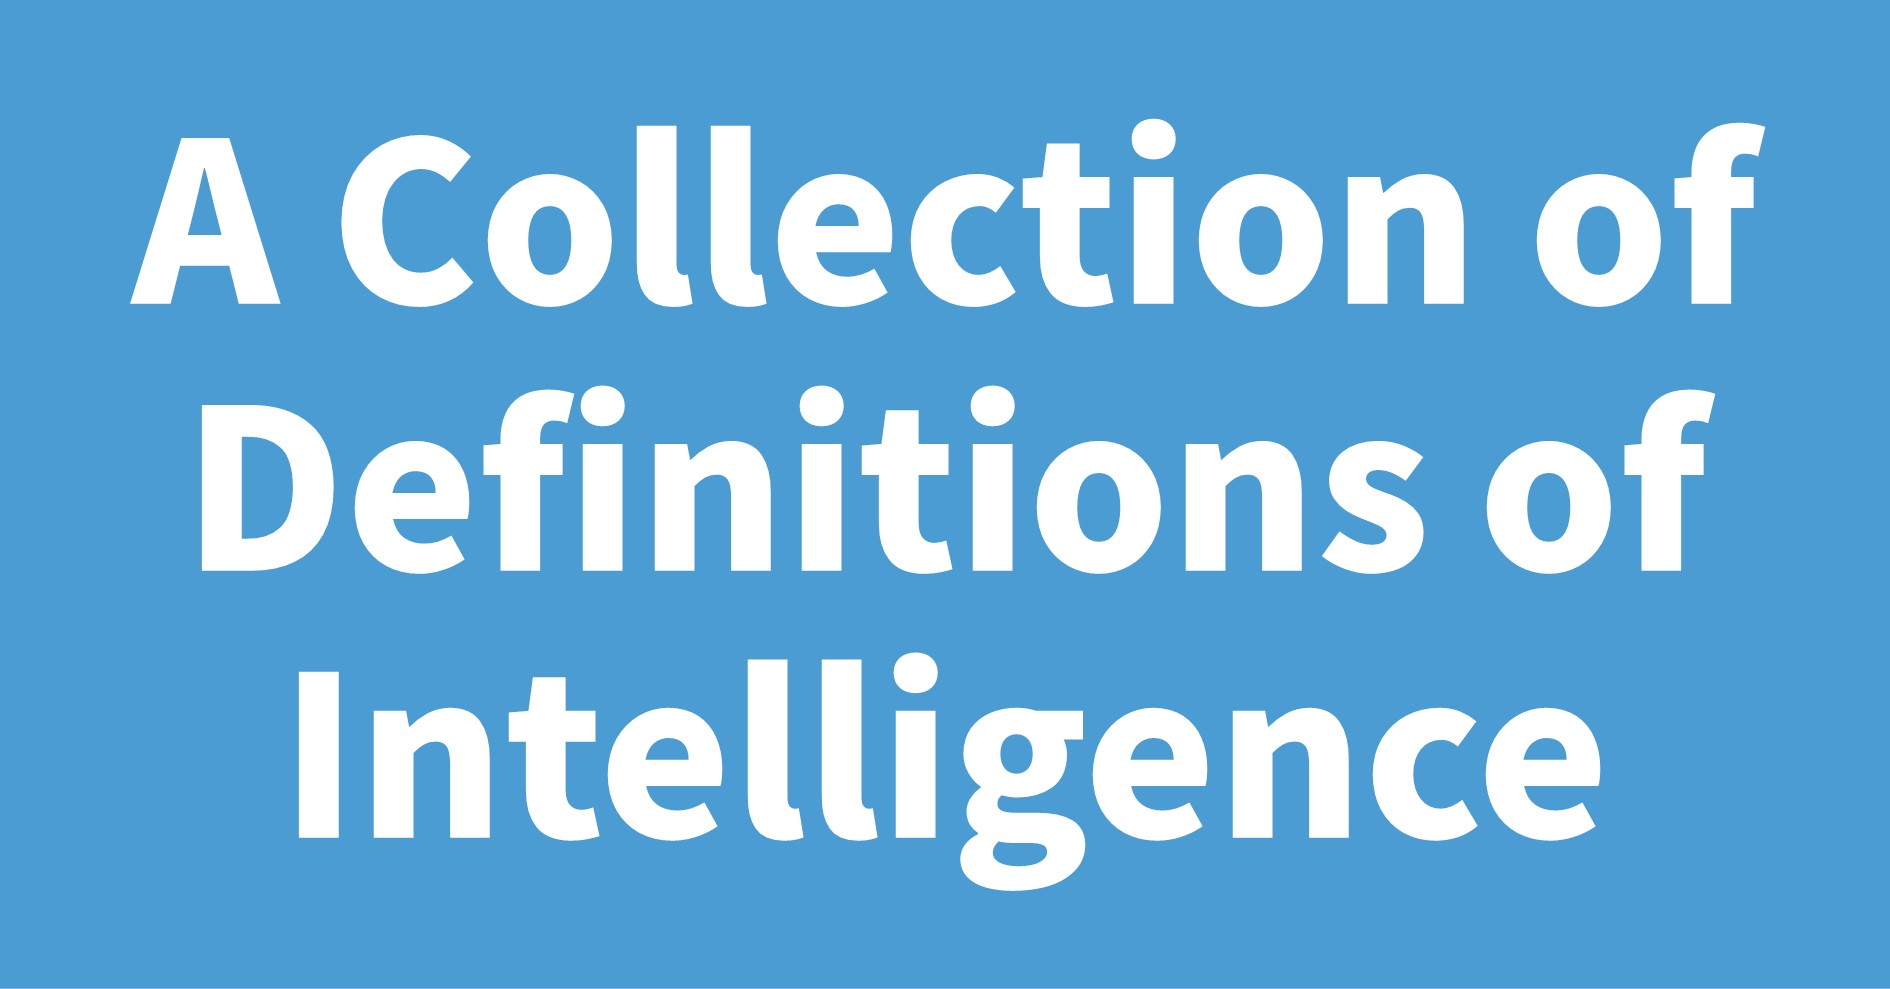 A Collection of Definitions of Intelligence